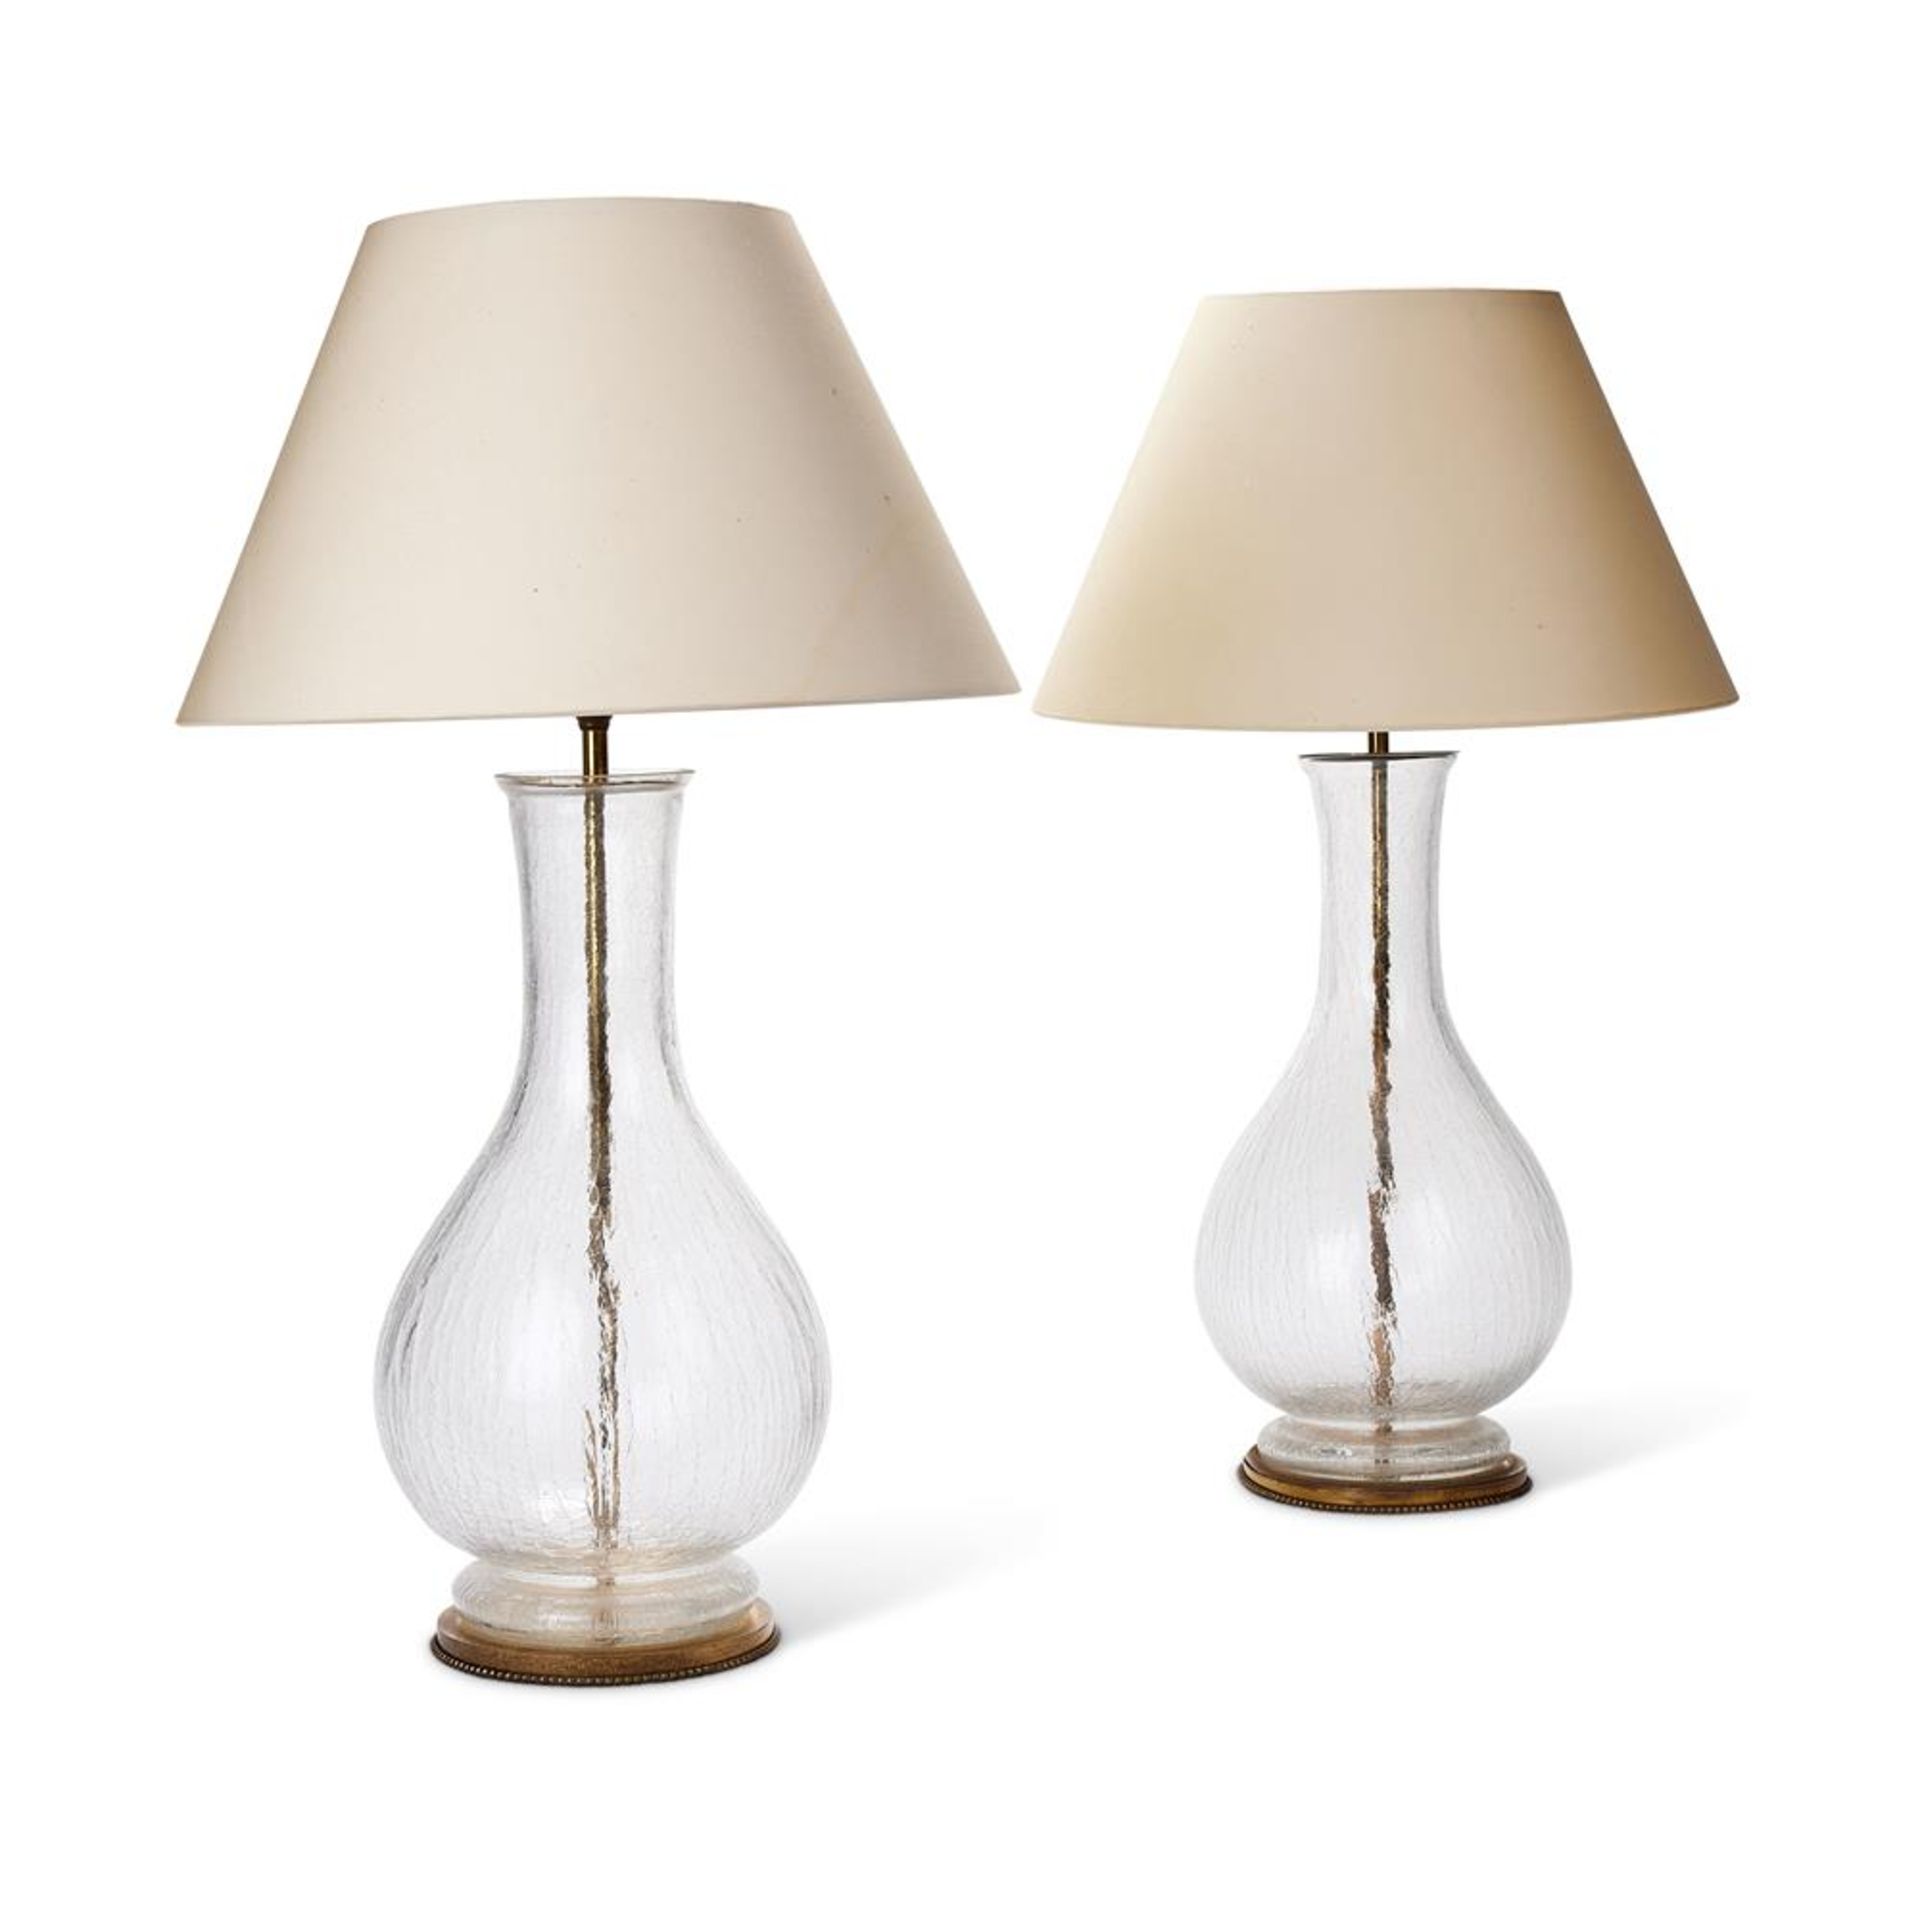 A PAIR OF CRACKLE GLASS BALUSTER TABLE LAMPS, SECOND HALF 20TH CENTURY